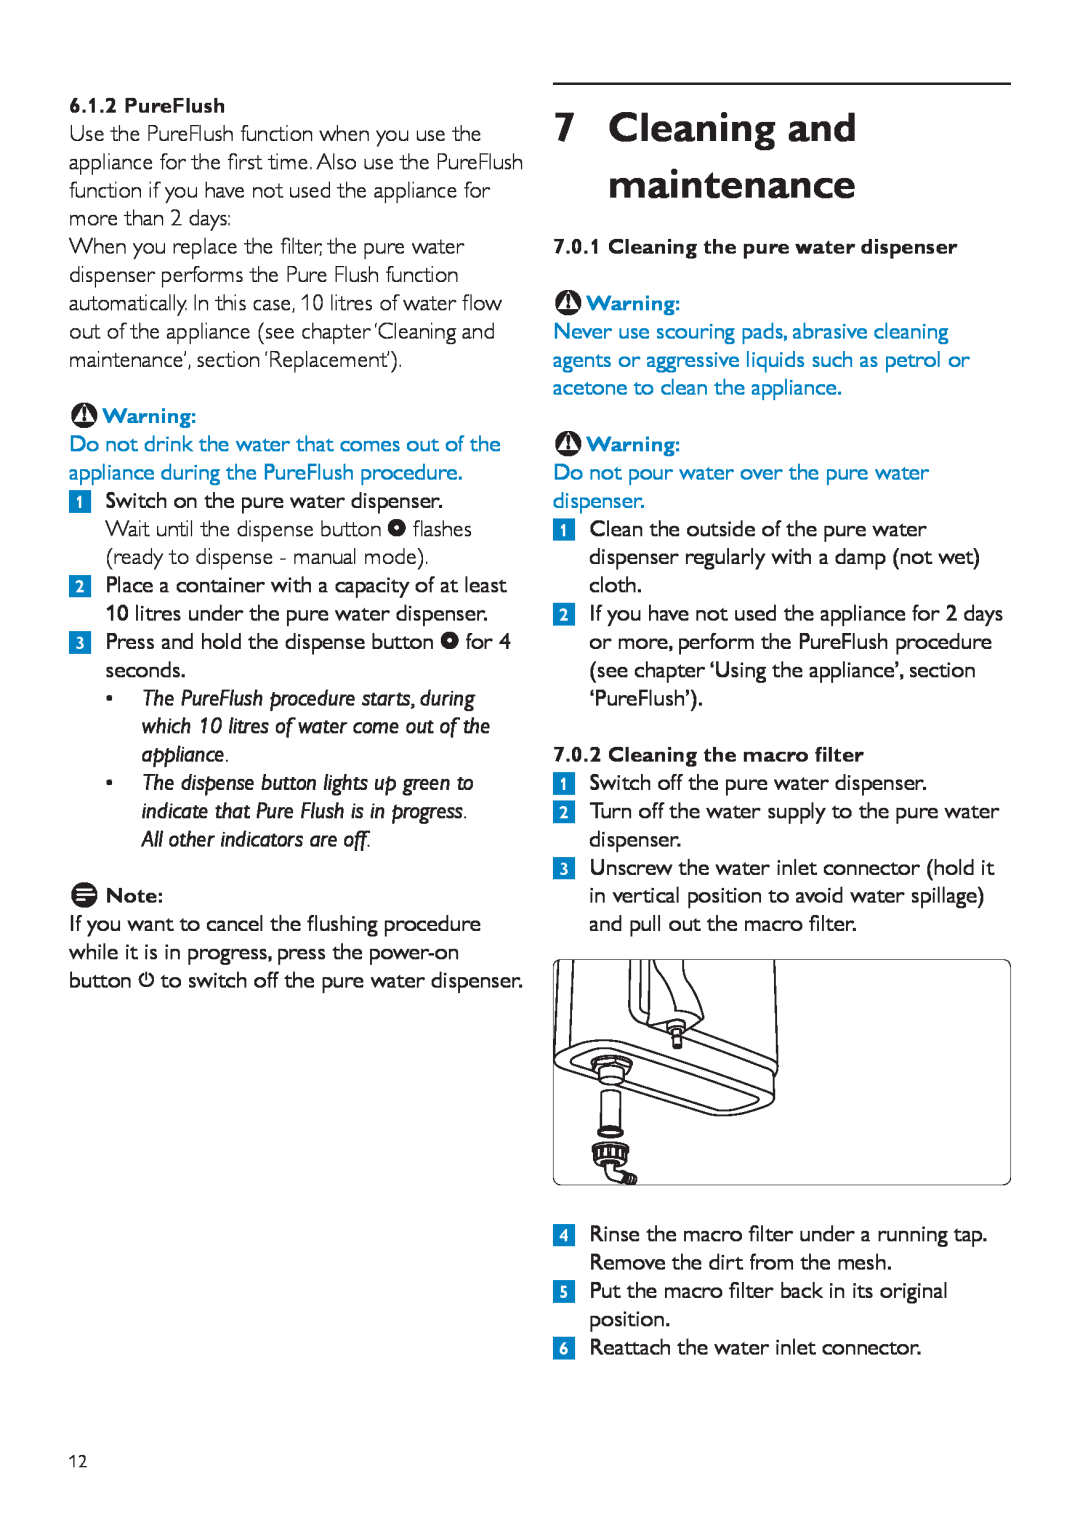 Philips WP3891, WP3890 user manual 7Cleaning and maintenance, Do not pour water over the pure water dispenser 